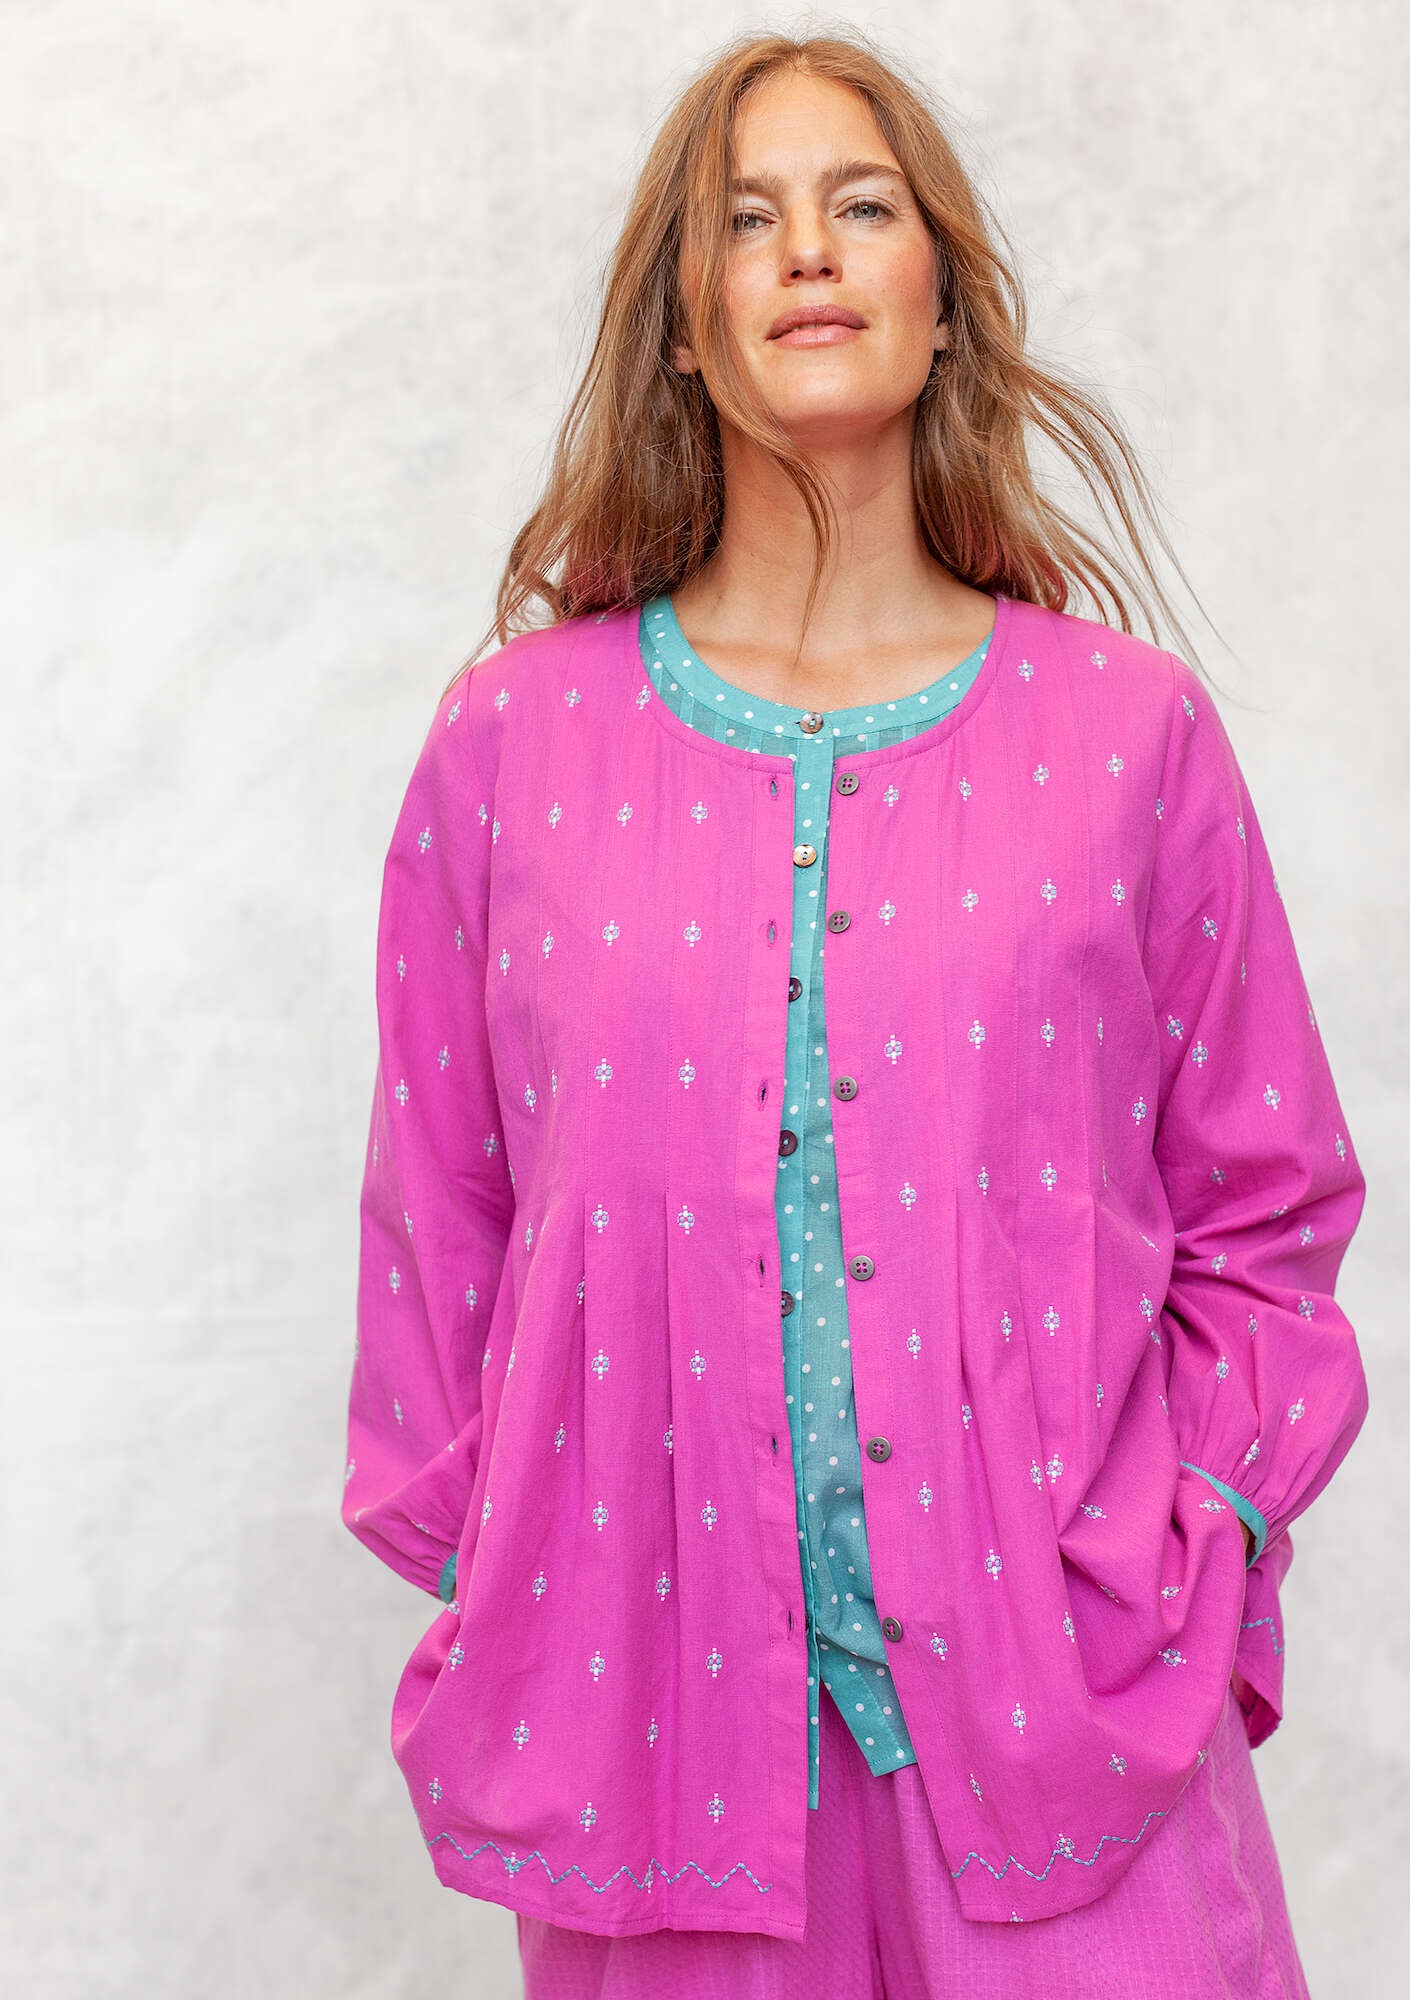 “Signe” woven artist’s blouse in organic cotton wild rose